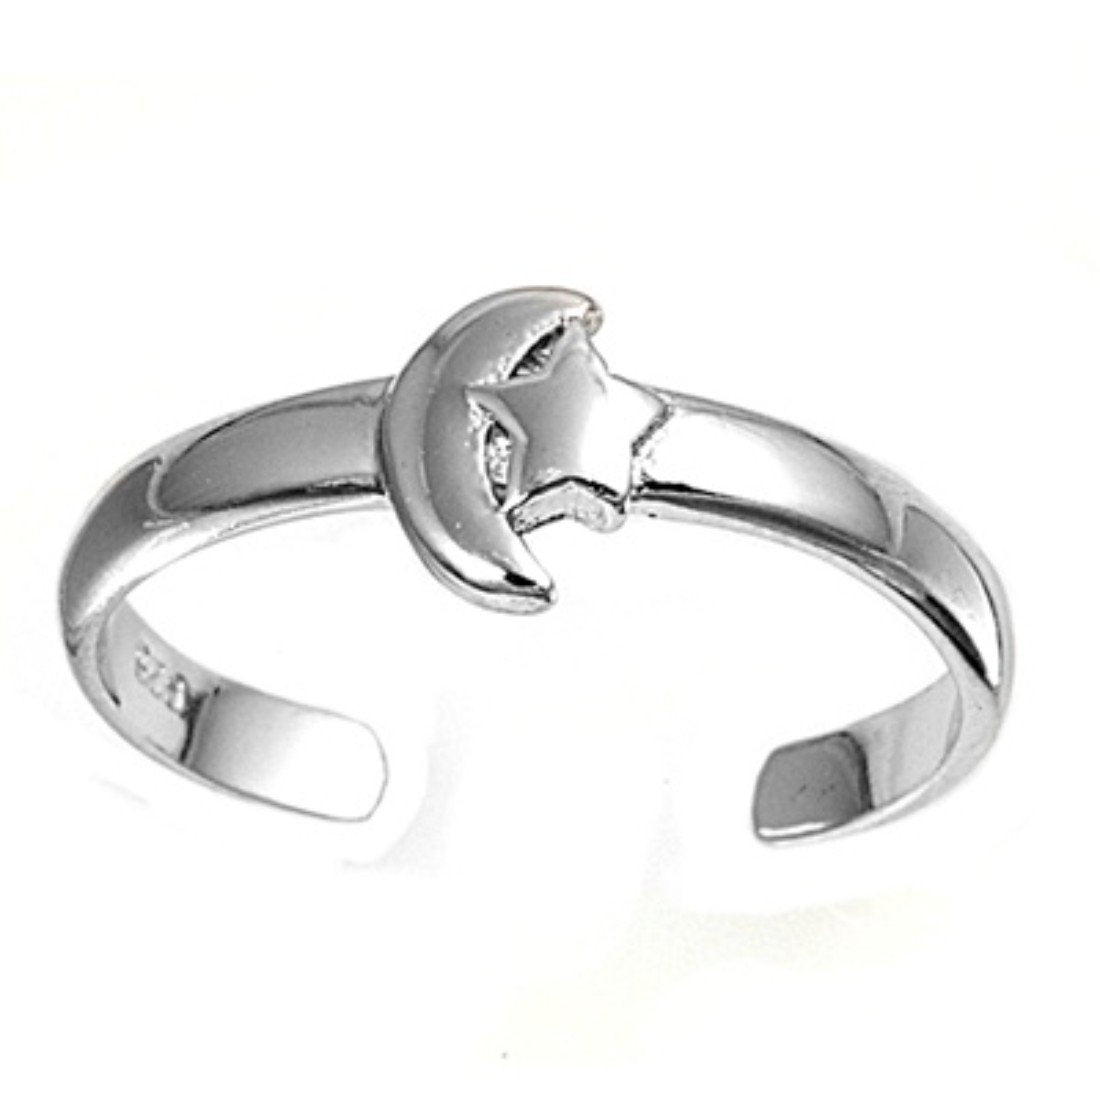 Moon Silver Toe Ring Adjustable 925 Sterling Silver (6mm)